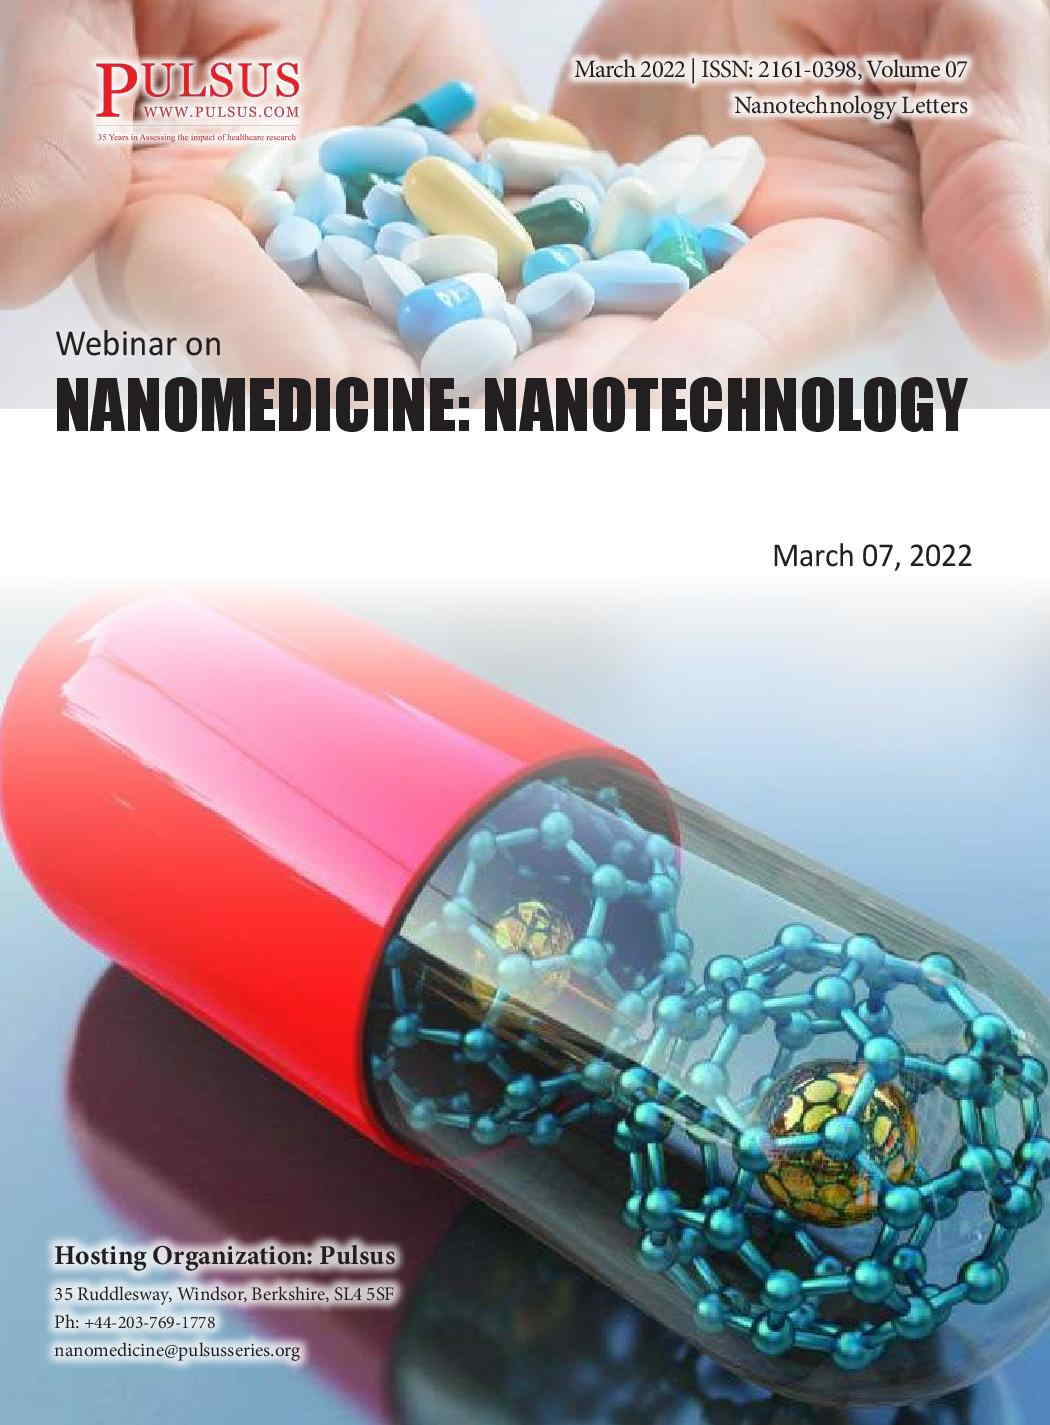 https://www.pulsus.com/special-issues/joint-event-on-4th-world-congress-on-nanoscience-and-nano-technology-and-5th-annual-congress-on-nanomedicine-and-drug-delivery.html